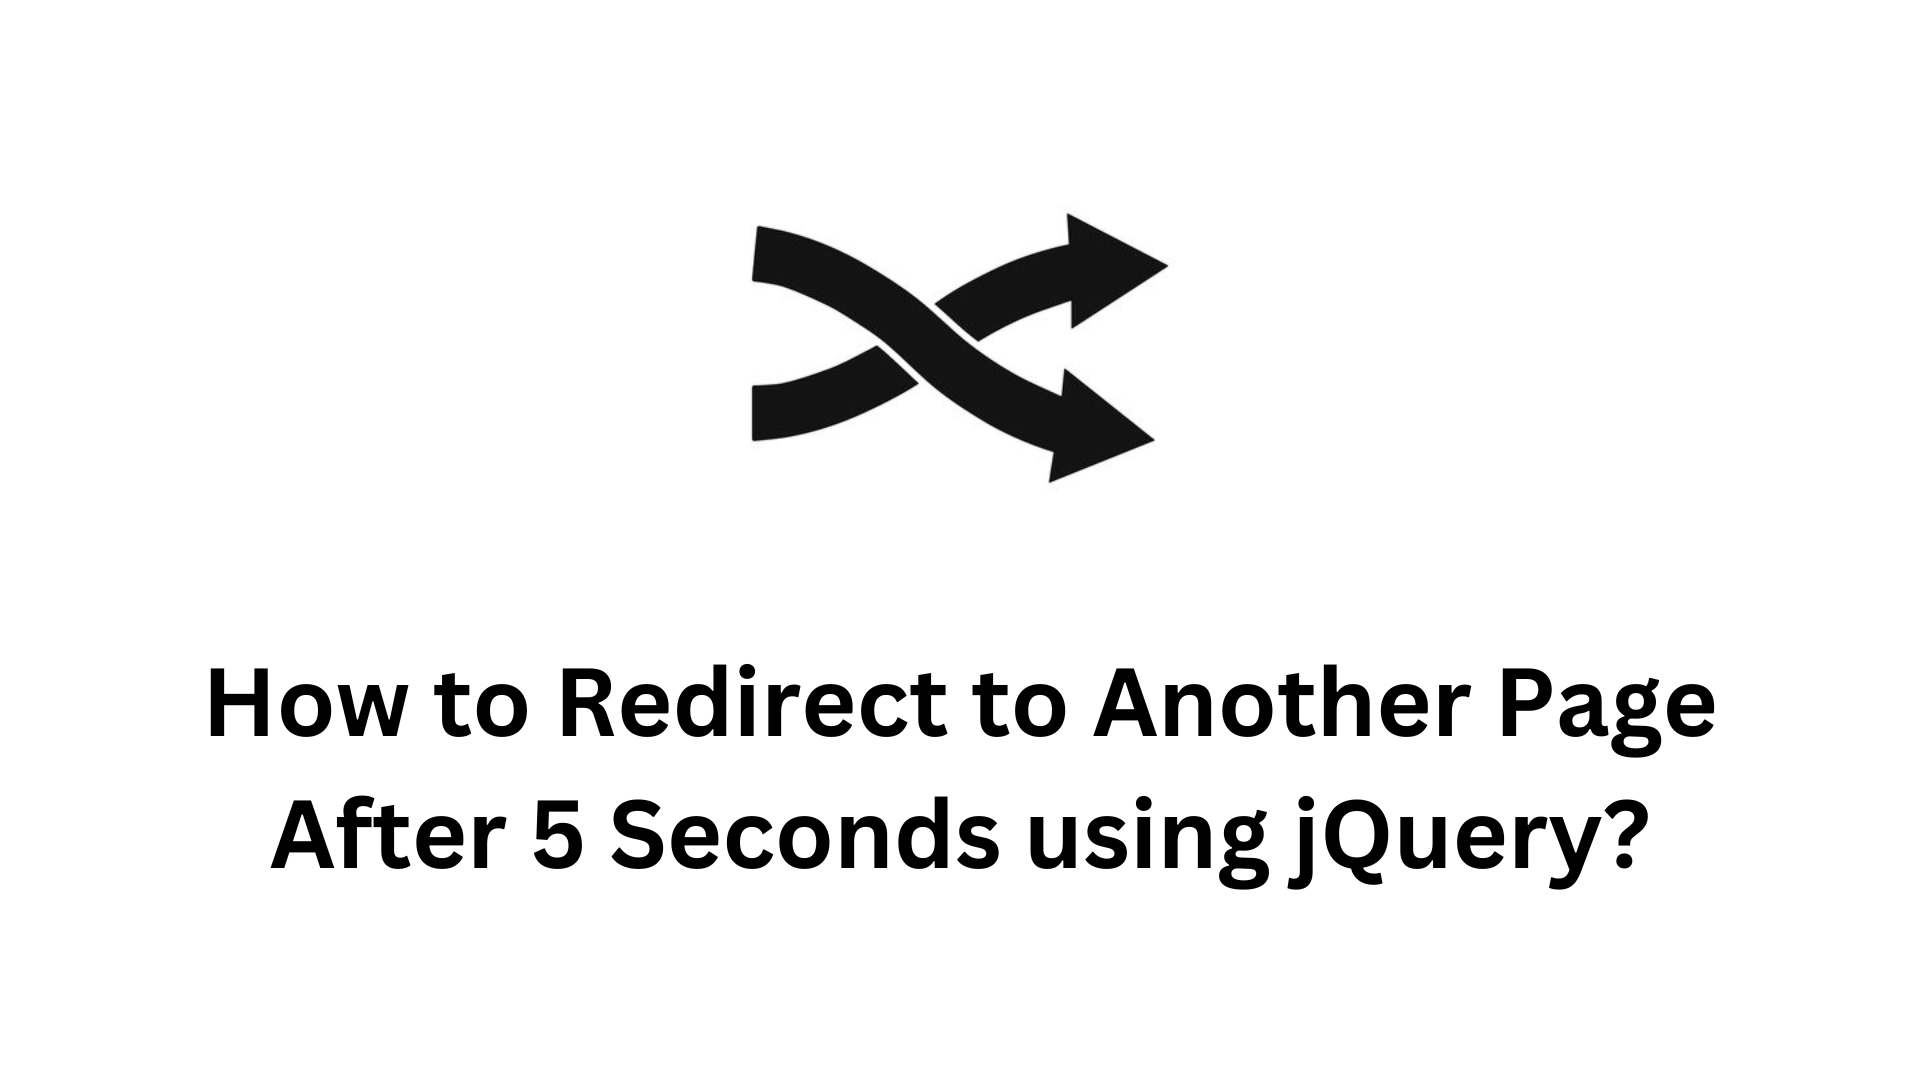 How to Redirect to Another Page After 5 Seconds using jQuery